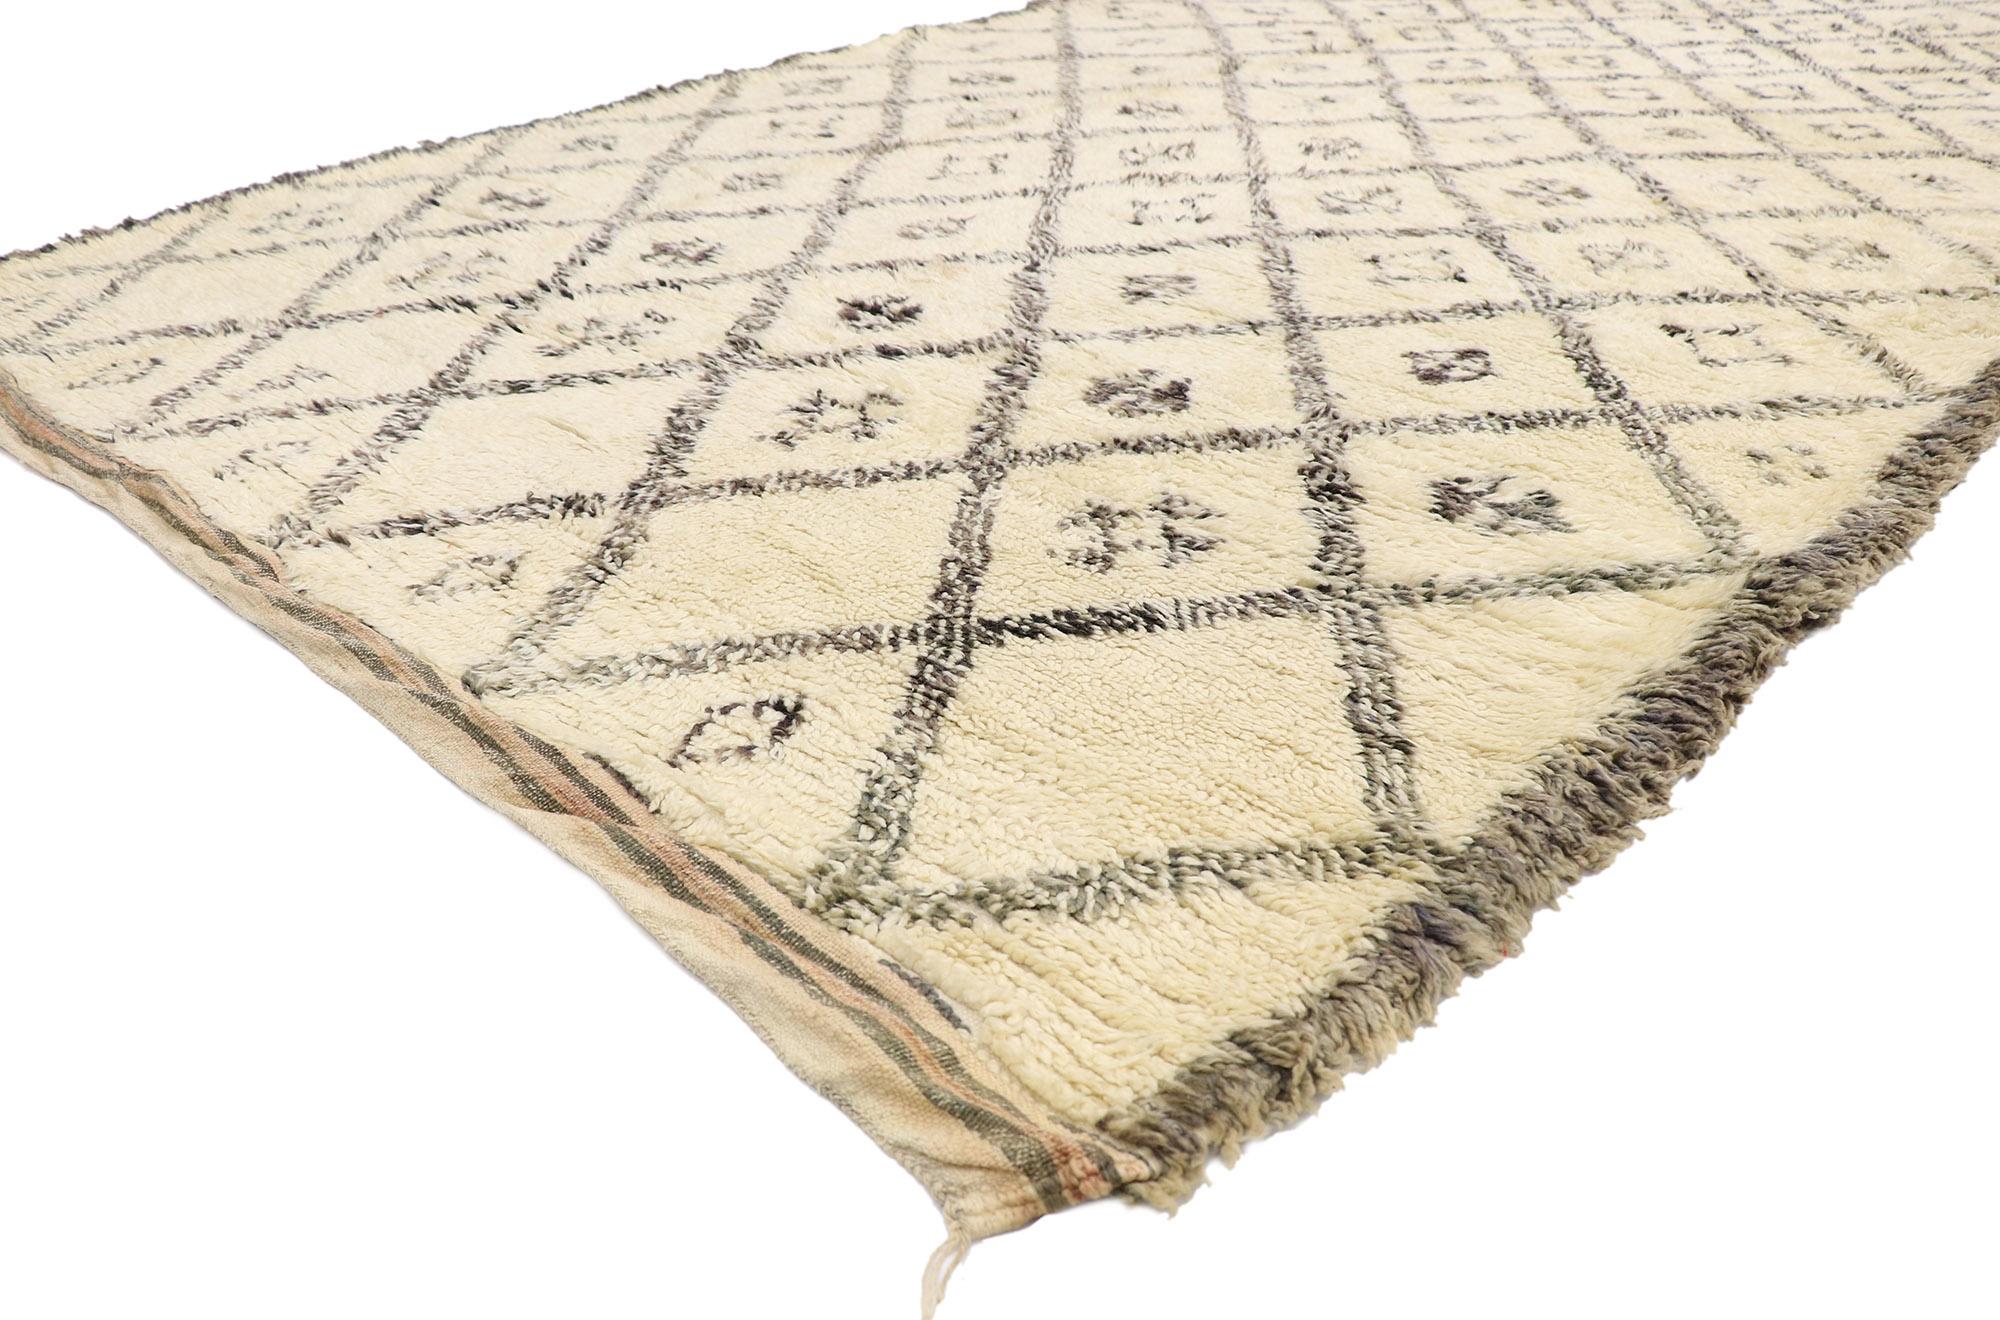 21389 Vintage Berber Beni Ourain Moroccan rug with Tribal Style 06'04 x 11'03. With its simplicity, plush pile and tribal style, this hand knotted wool vintage Berber Beni Ourain Moroccan rug is a captivating vision of woven beauty. It features a